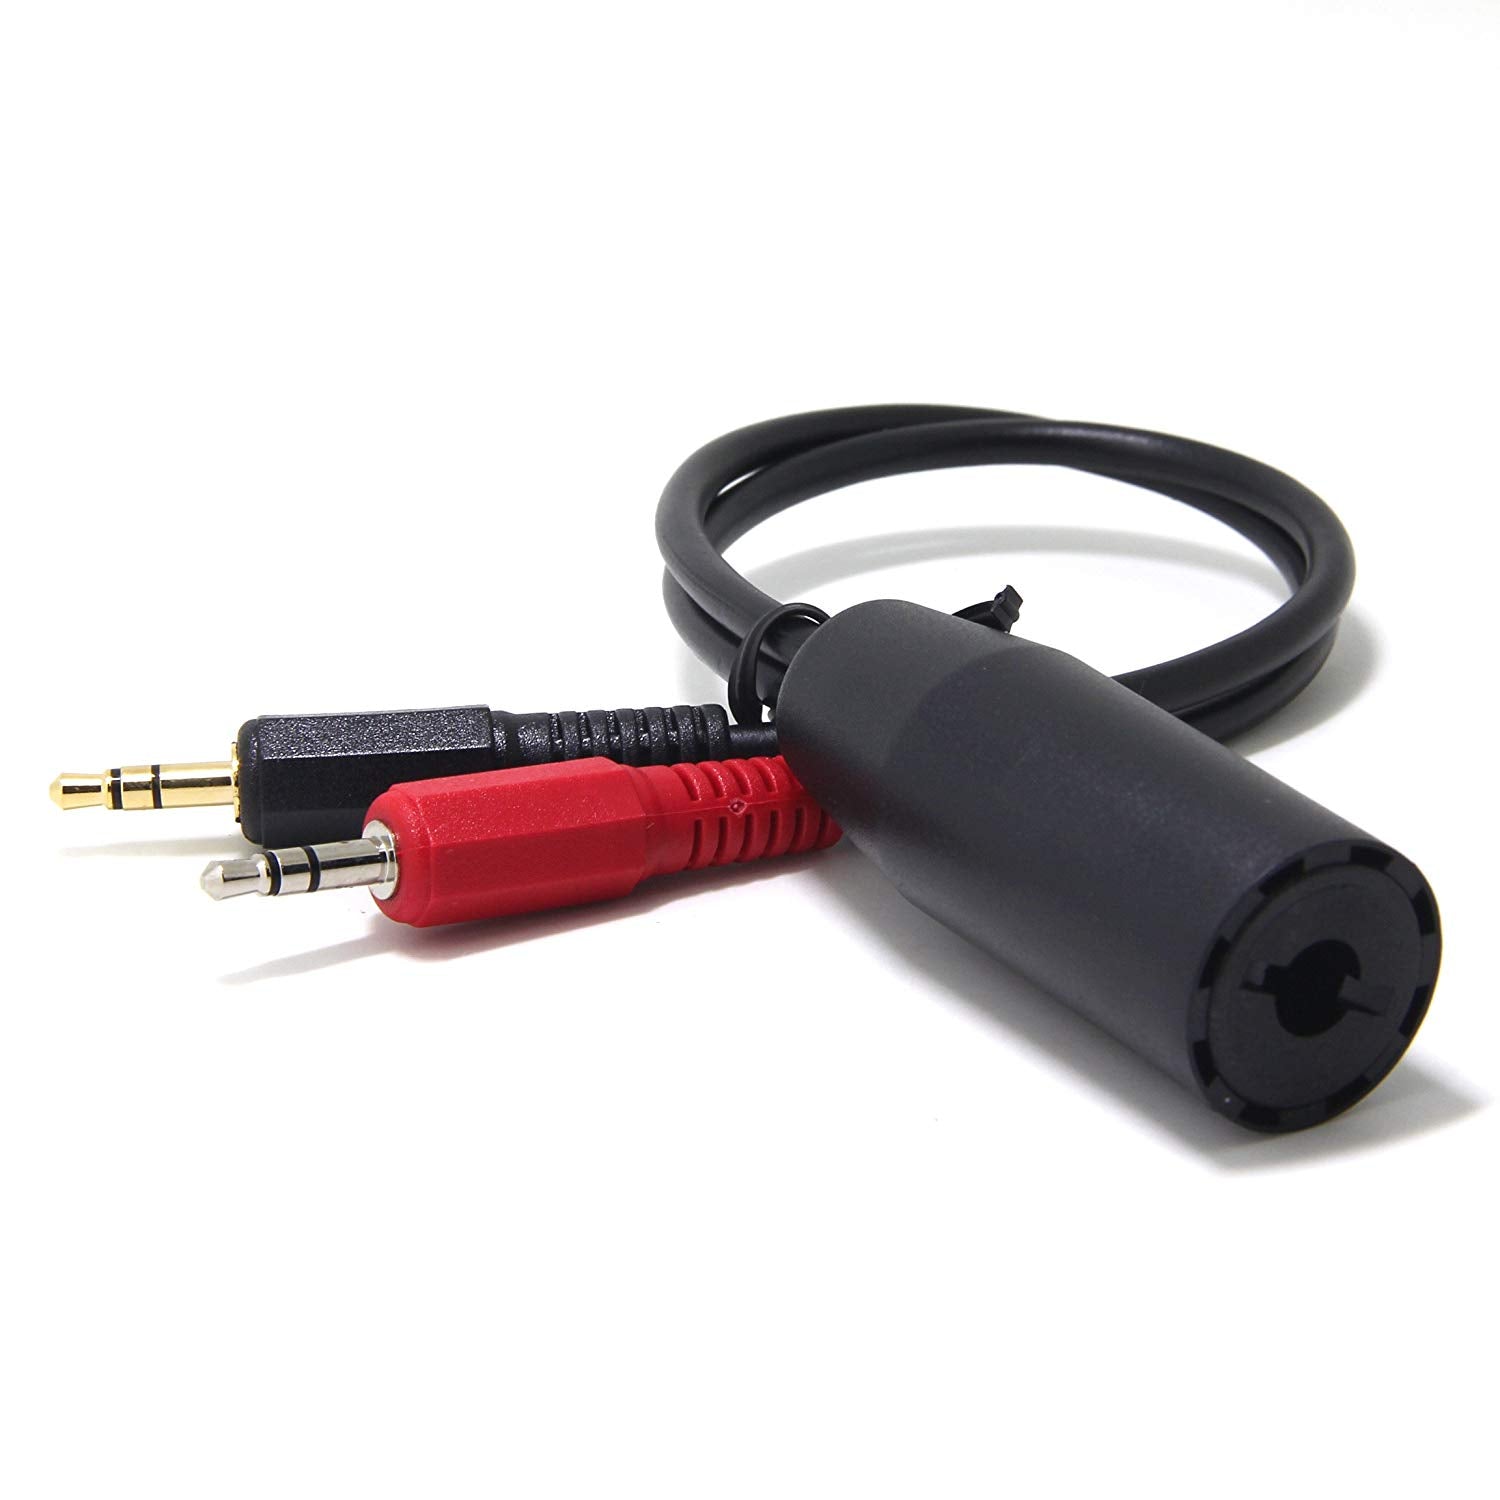 Cascos con cable Jack 3.5 mm HP-008